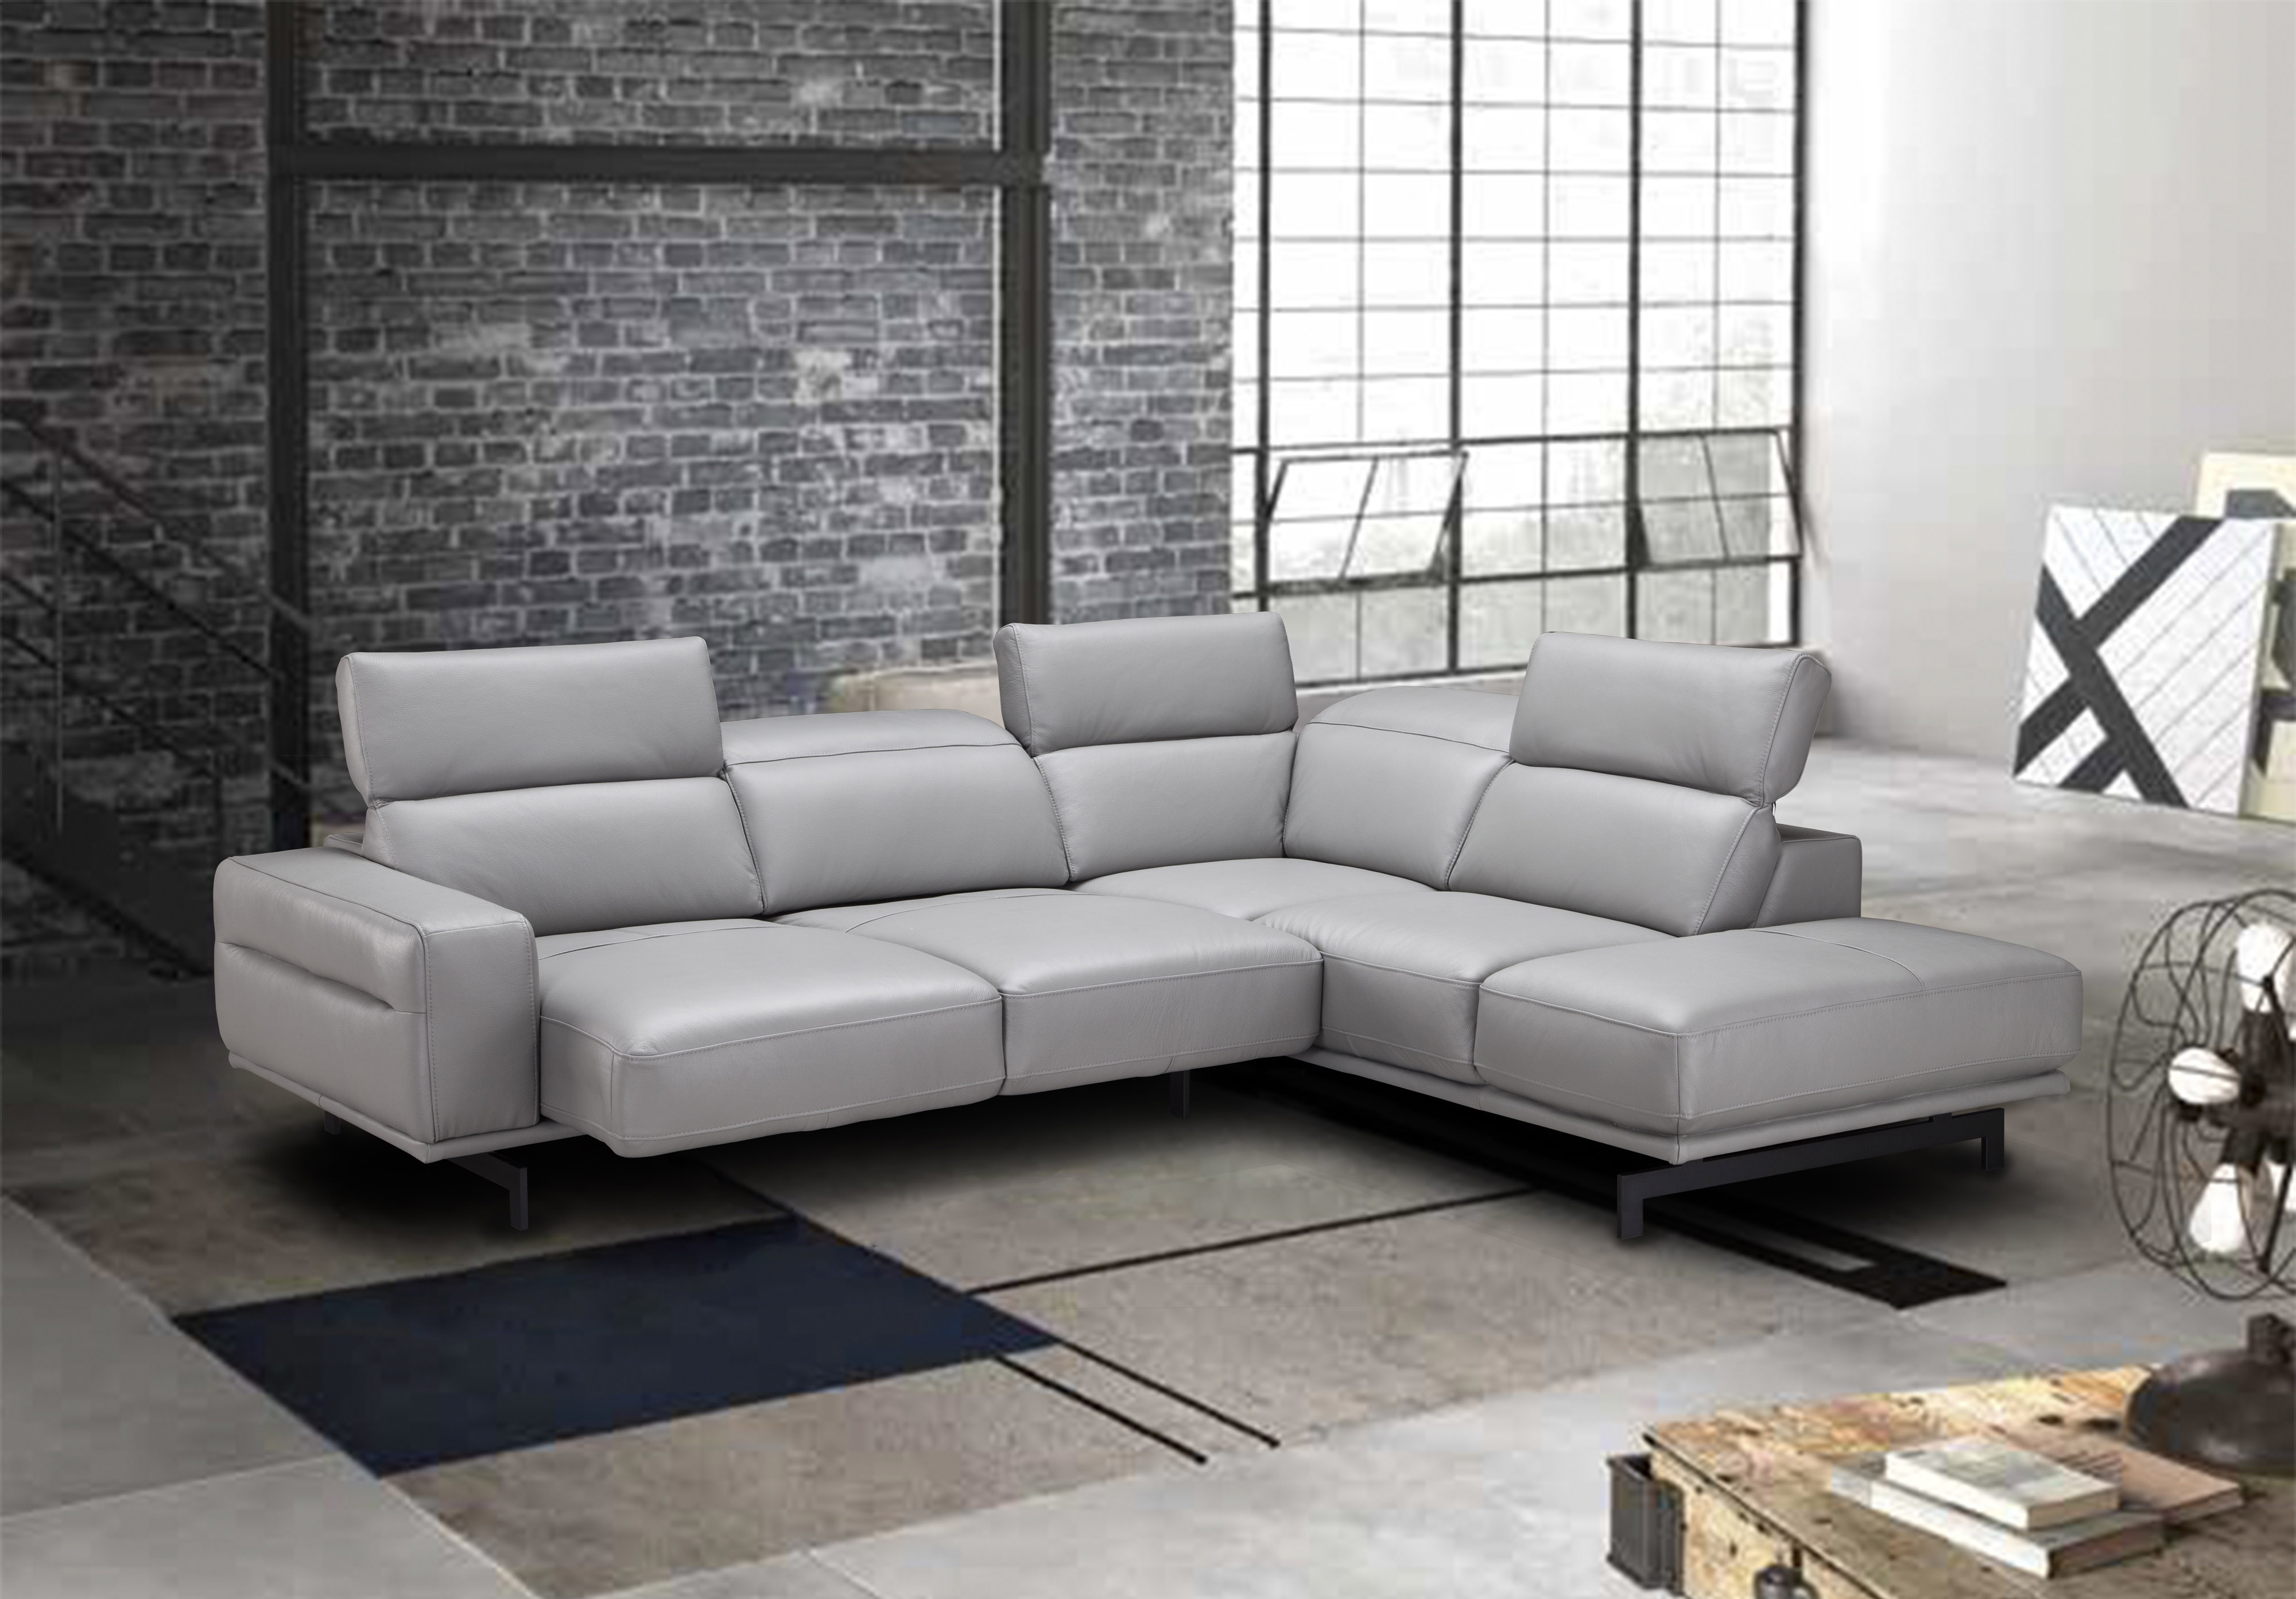 leather sectional sofa couch